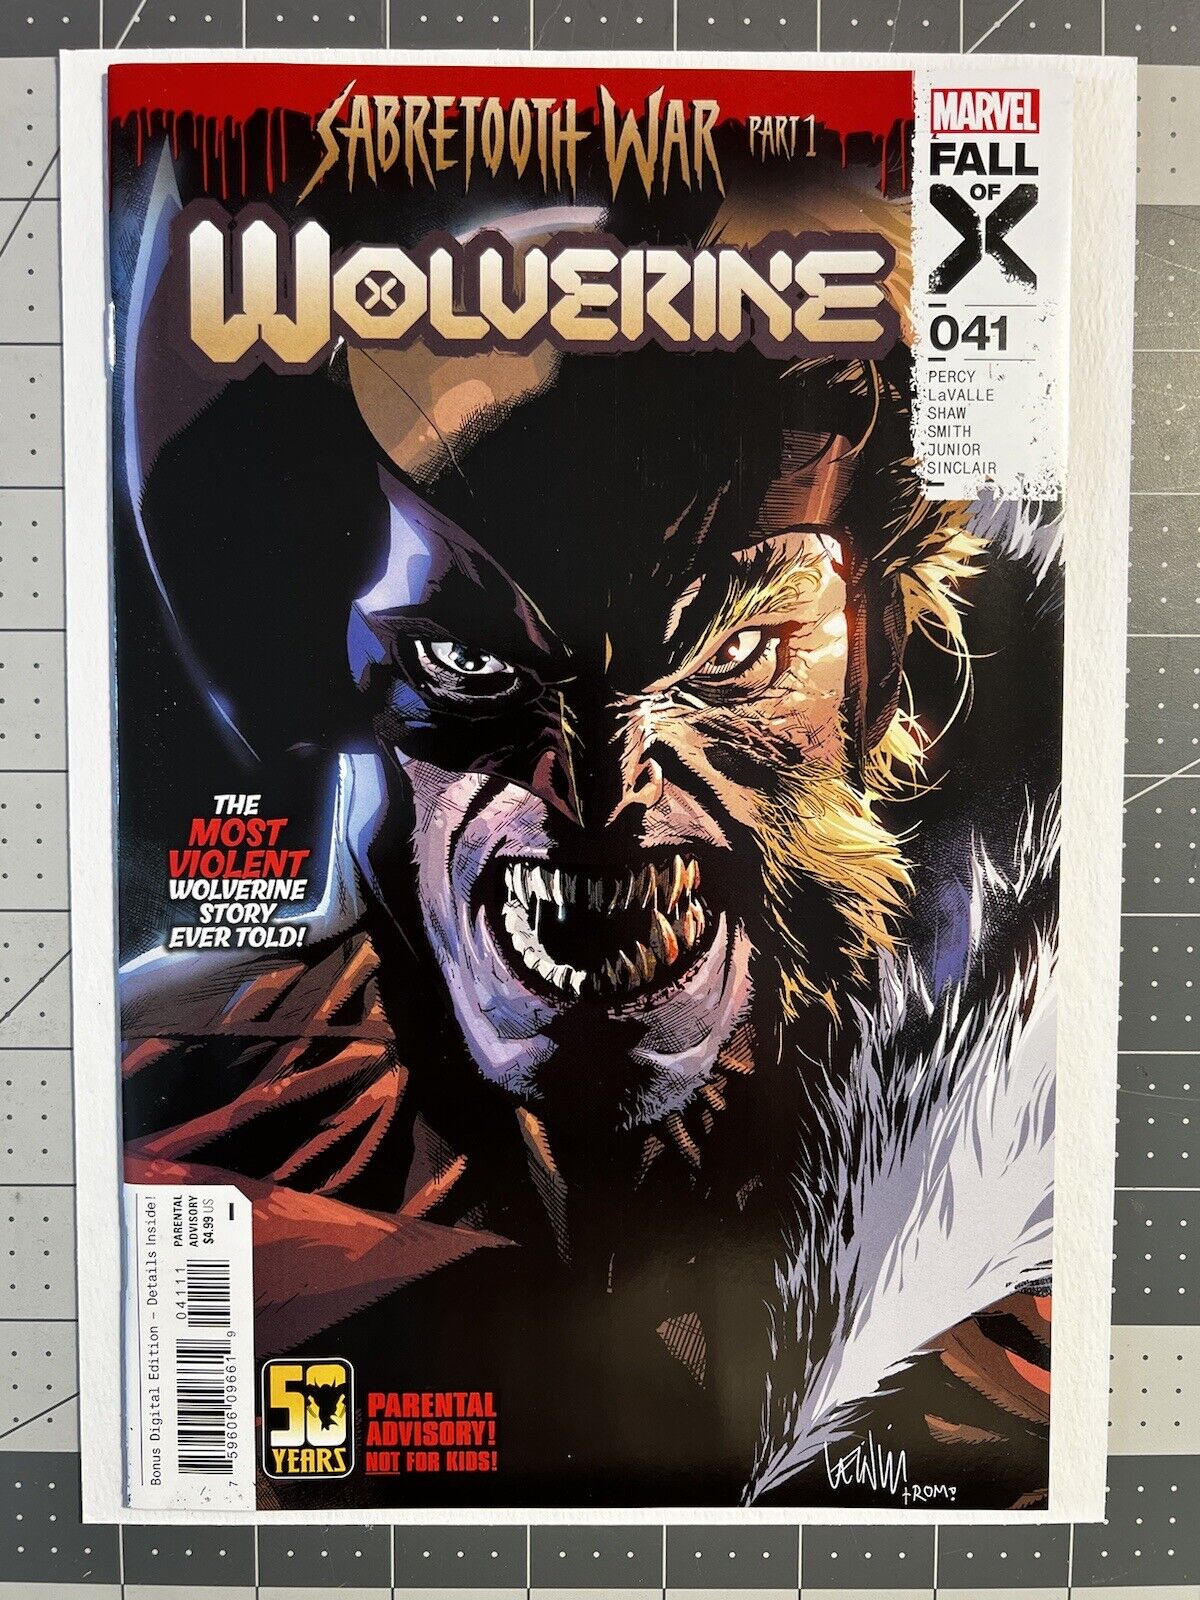 Wolverine #41 Cover A FIRST 1st Print Sabretooth War Part 1 NM